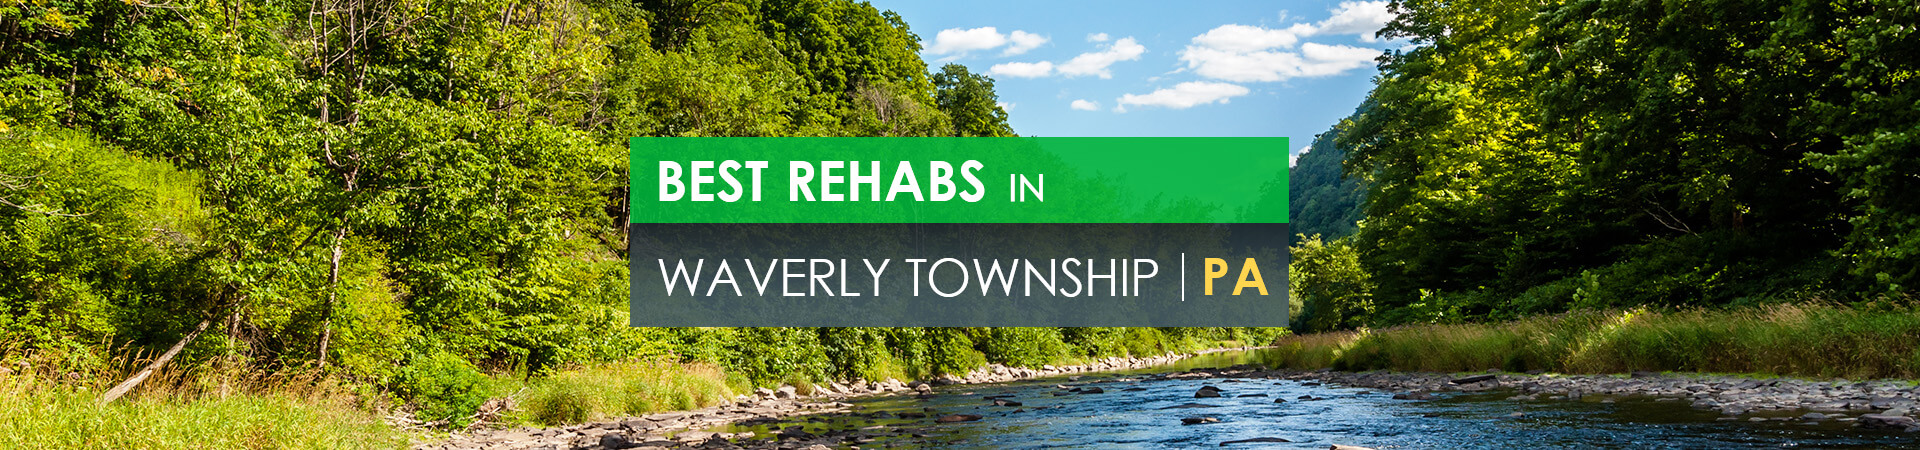 Best rehabs in Waverly Township, PA